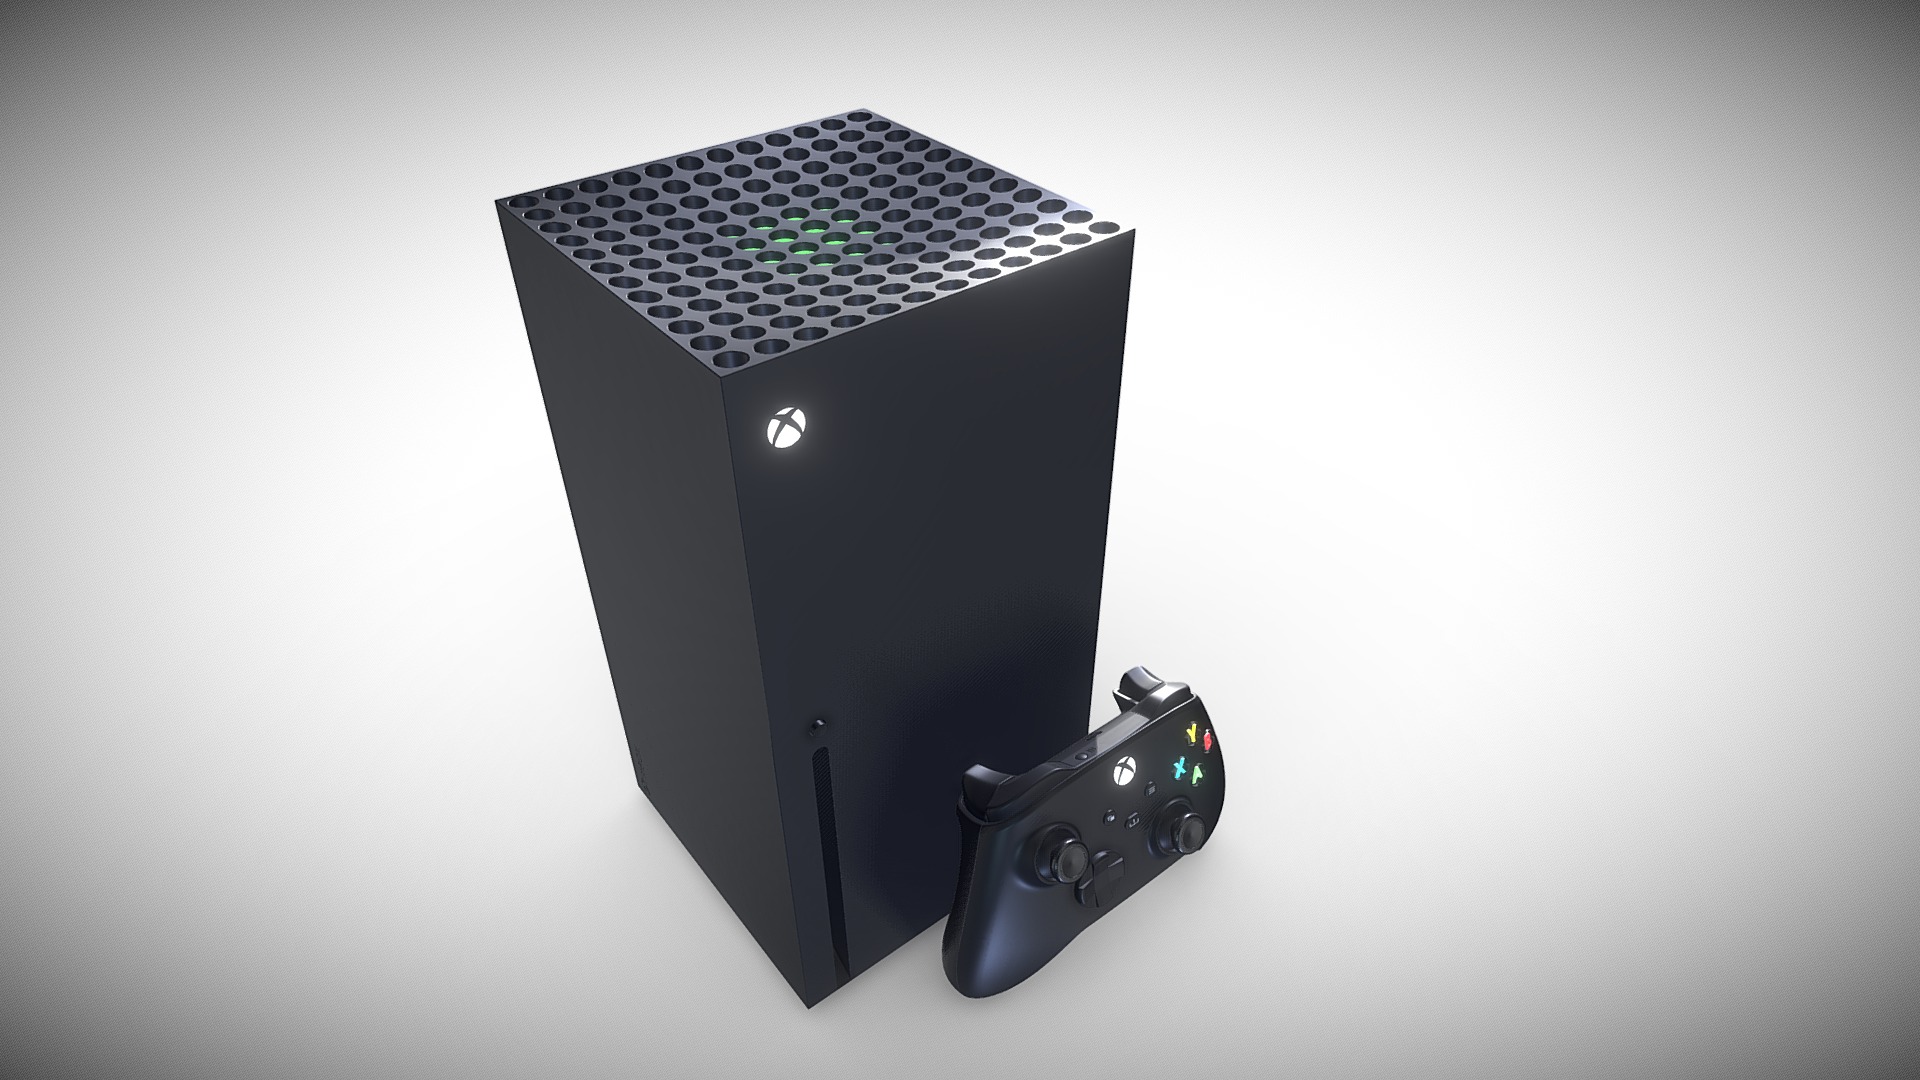 3D model X-box Series X + correct rear - This is a 3D model of the X-box Series X + correct rear. The 3D model is about a black computer tower.